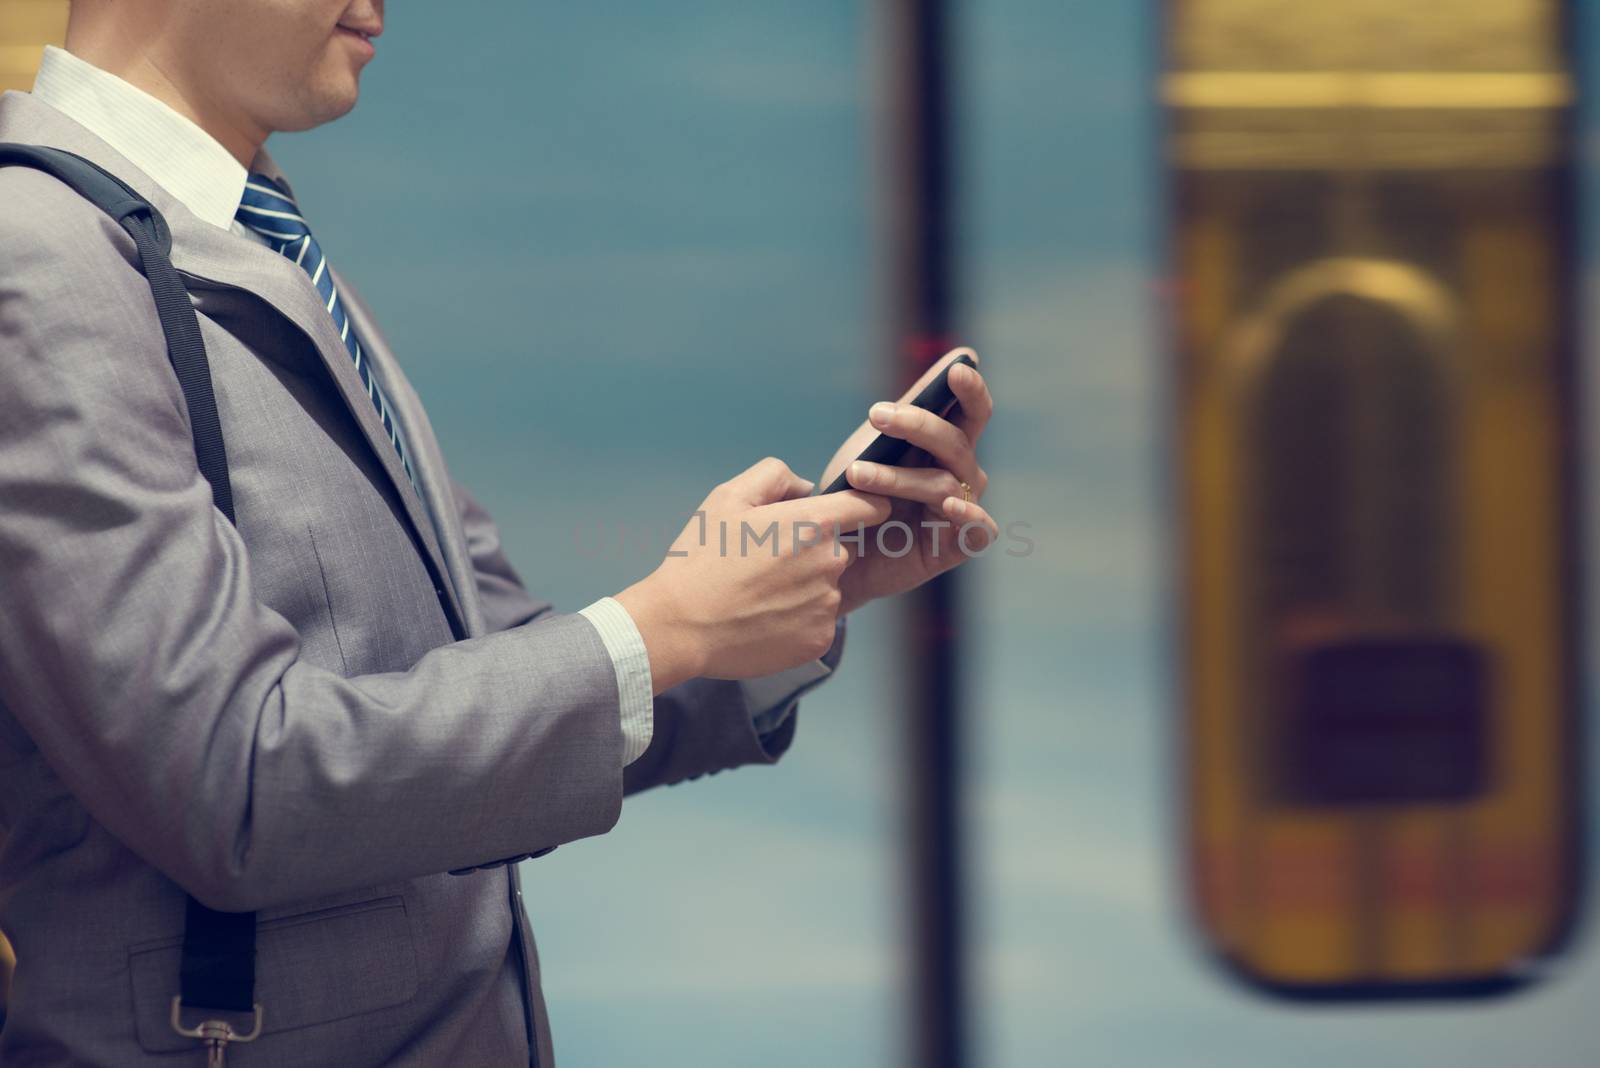 Business people hand using smart phone in subway station, train passing by at the background.